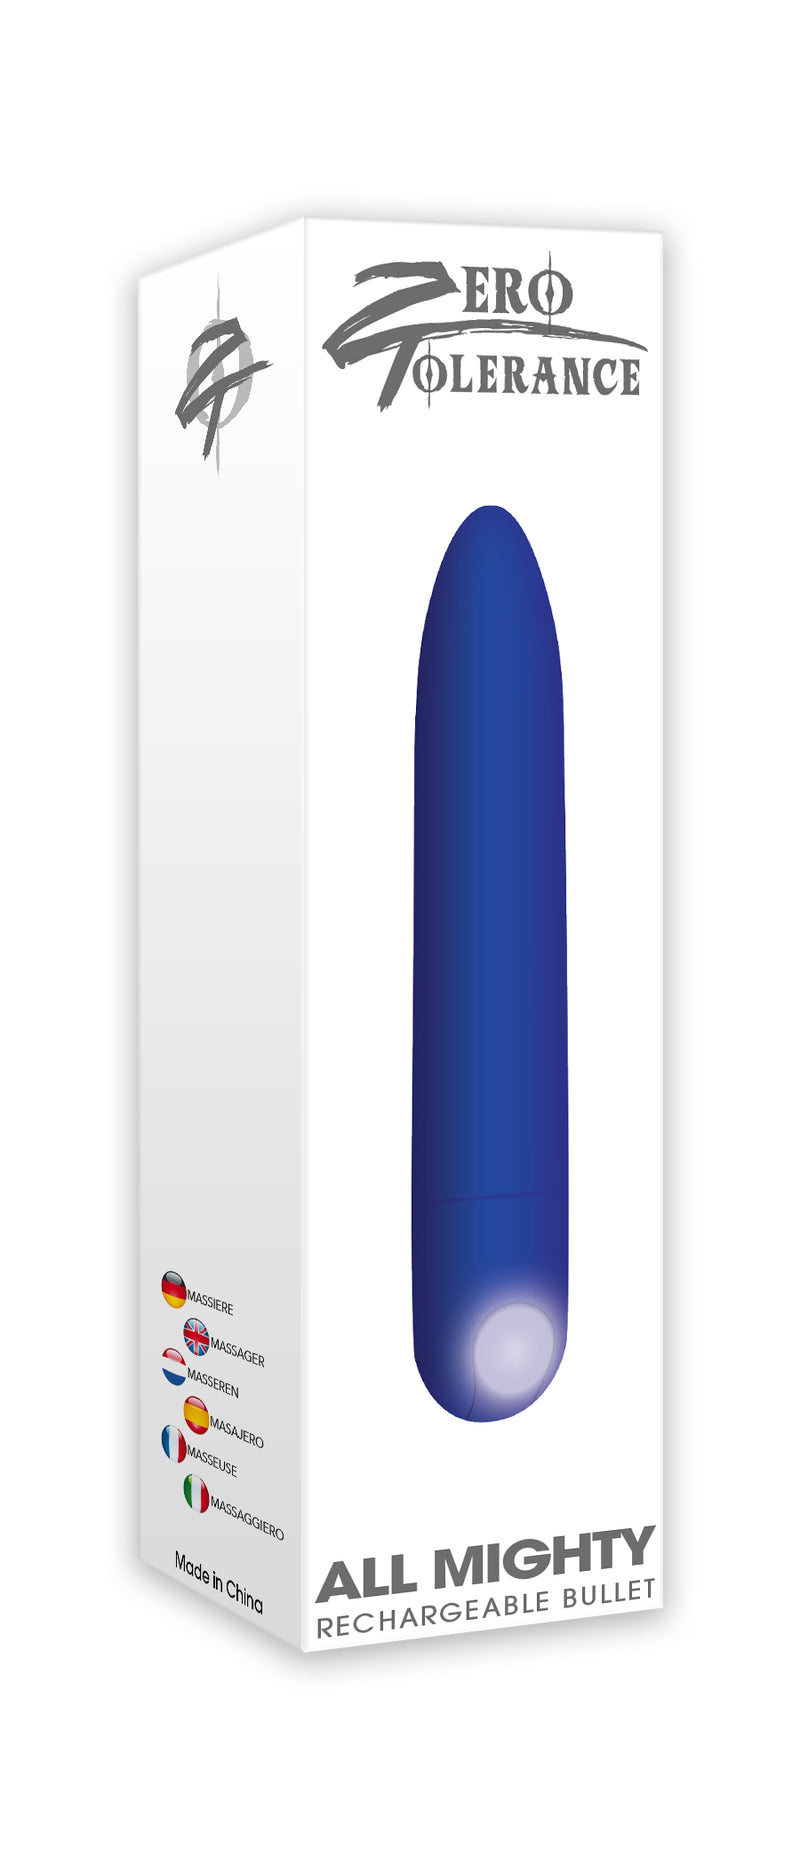 Powerful and Rechargeable Little Blue Bullet for Intense Pleasure